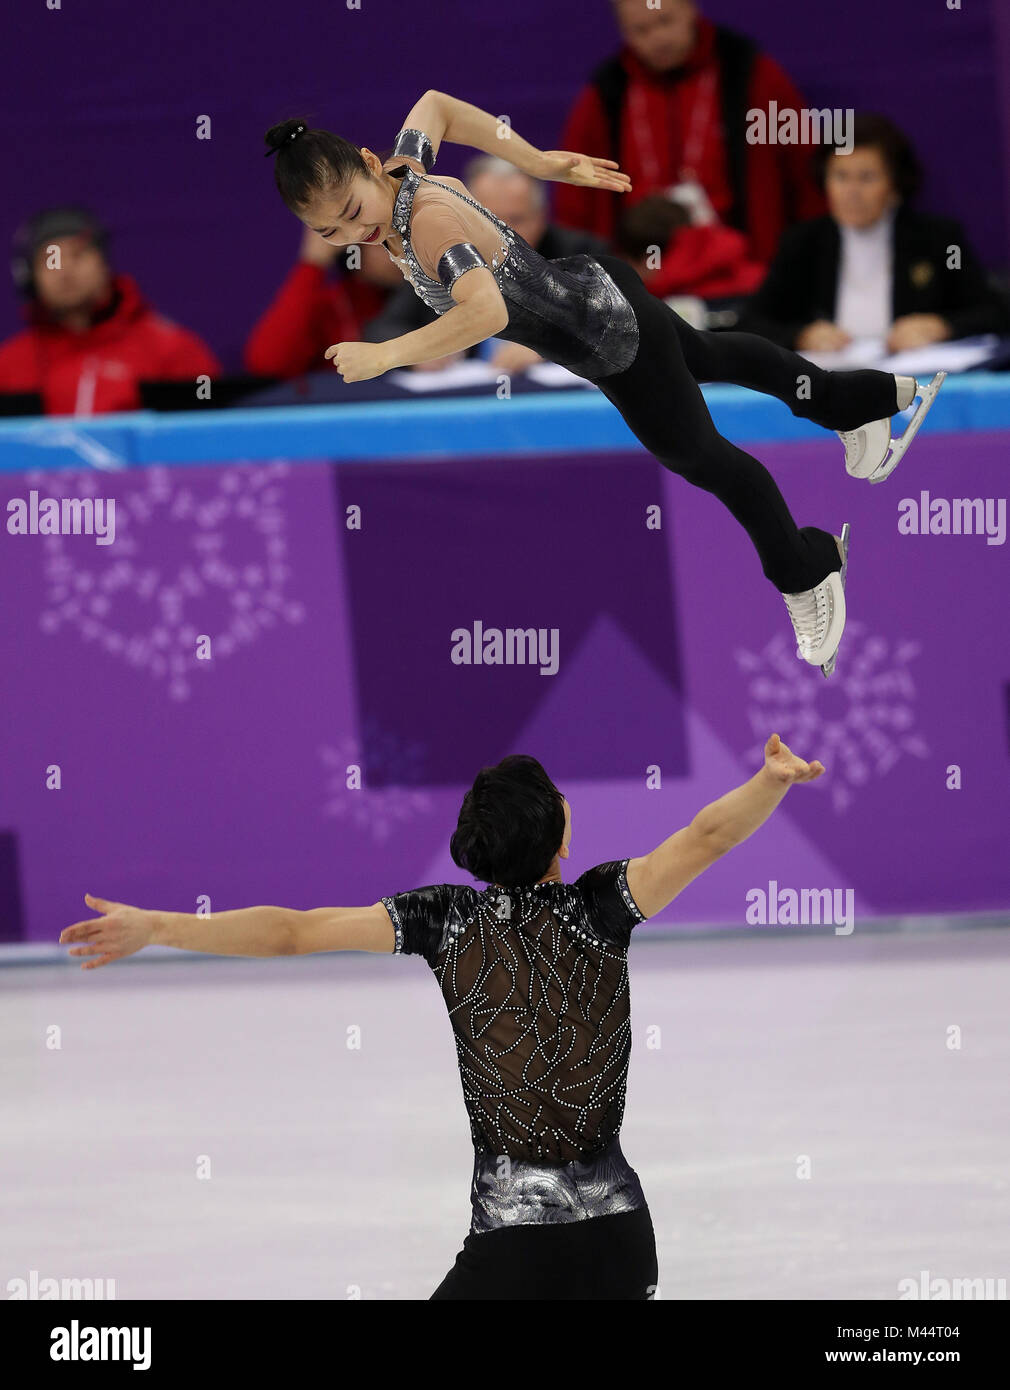 Tae Ok Ryom and Ju Sik Kim of North Korea in the Pairs Figures Skating at the Gangneung Ice Arena during day five of the PyeongChang 2018 Winter Olympic Games in South Korea. Stock Photo